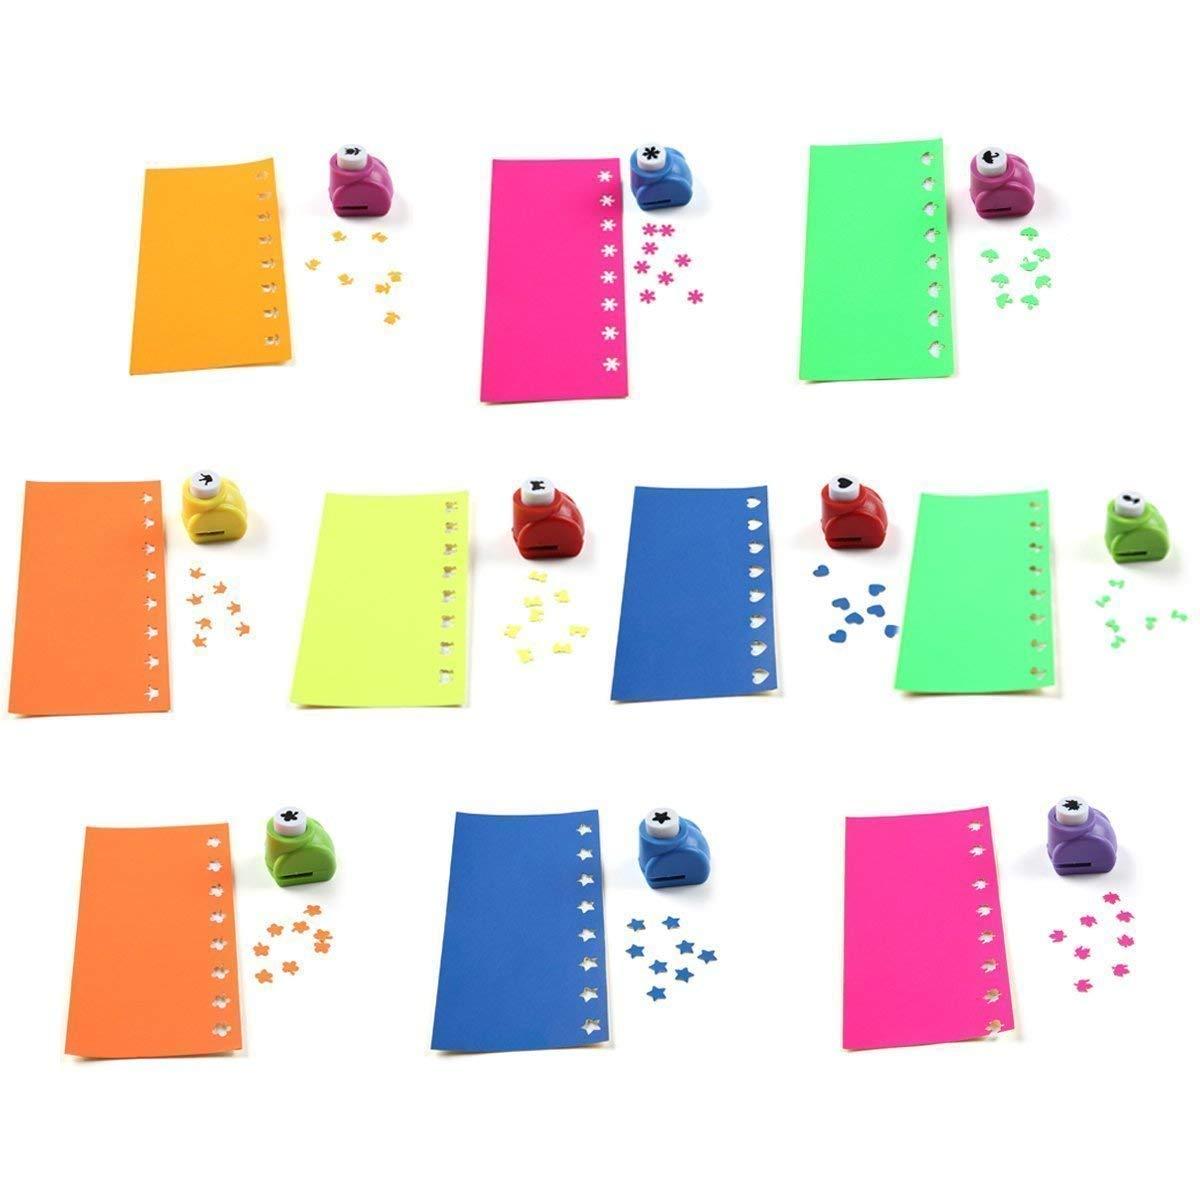  10 Pack Punch Craft Set, Colorful Crafts Hole Punch Shape,  Hole Punch Shape Scrapbooking Supplies Shapes Hole Punch, Great For  Crafting And Fun Projects